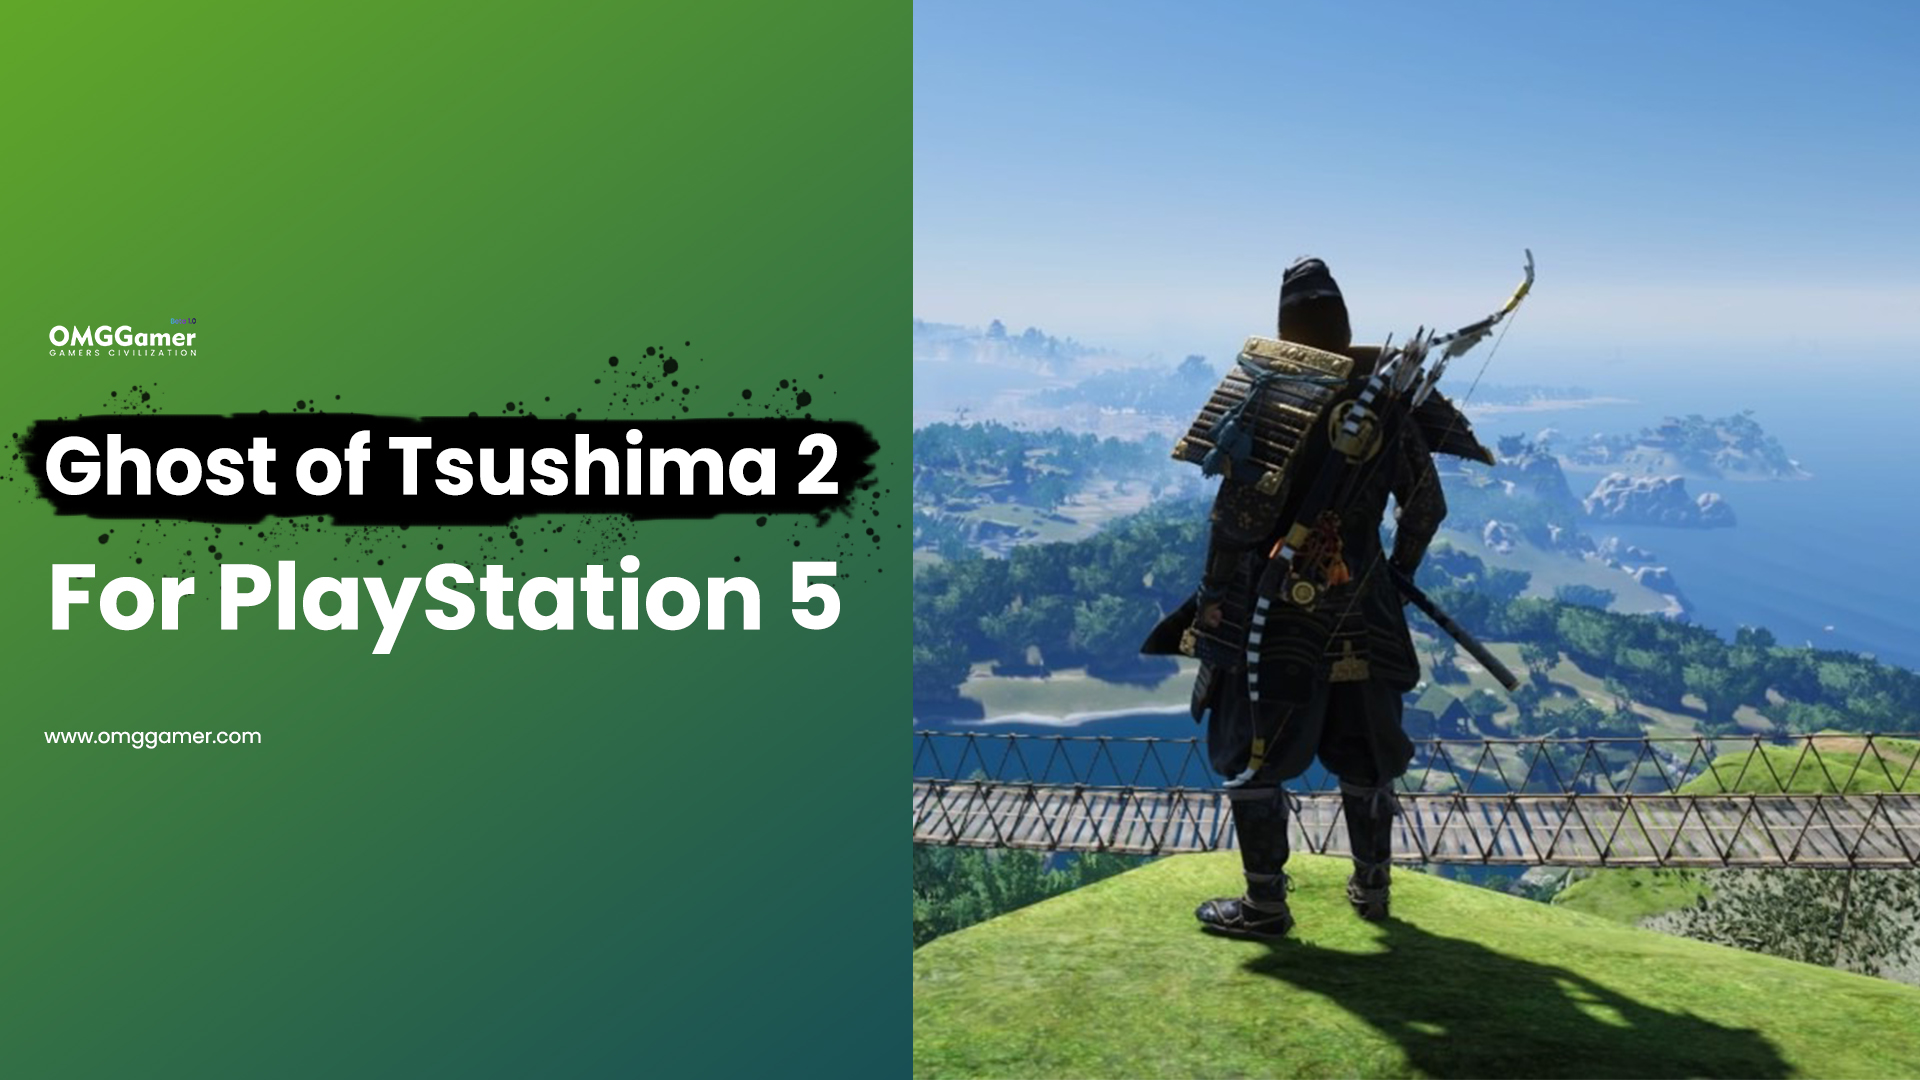 Ghost of Tsushima 2 for PlayStation 5